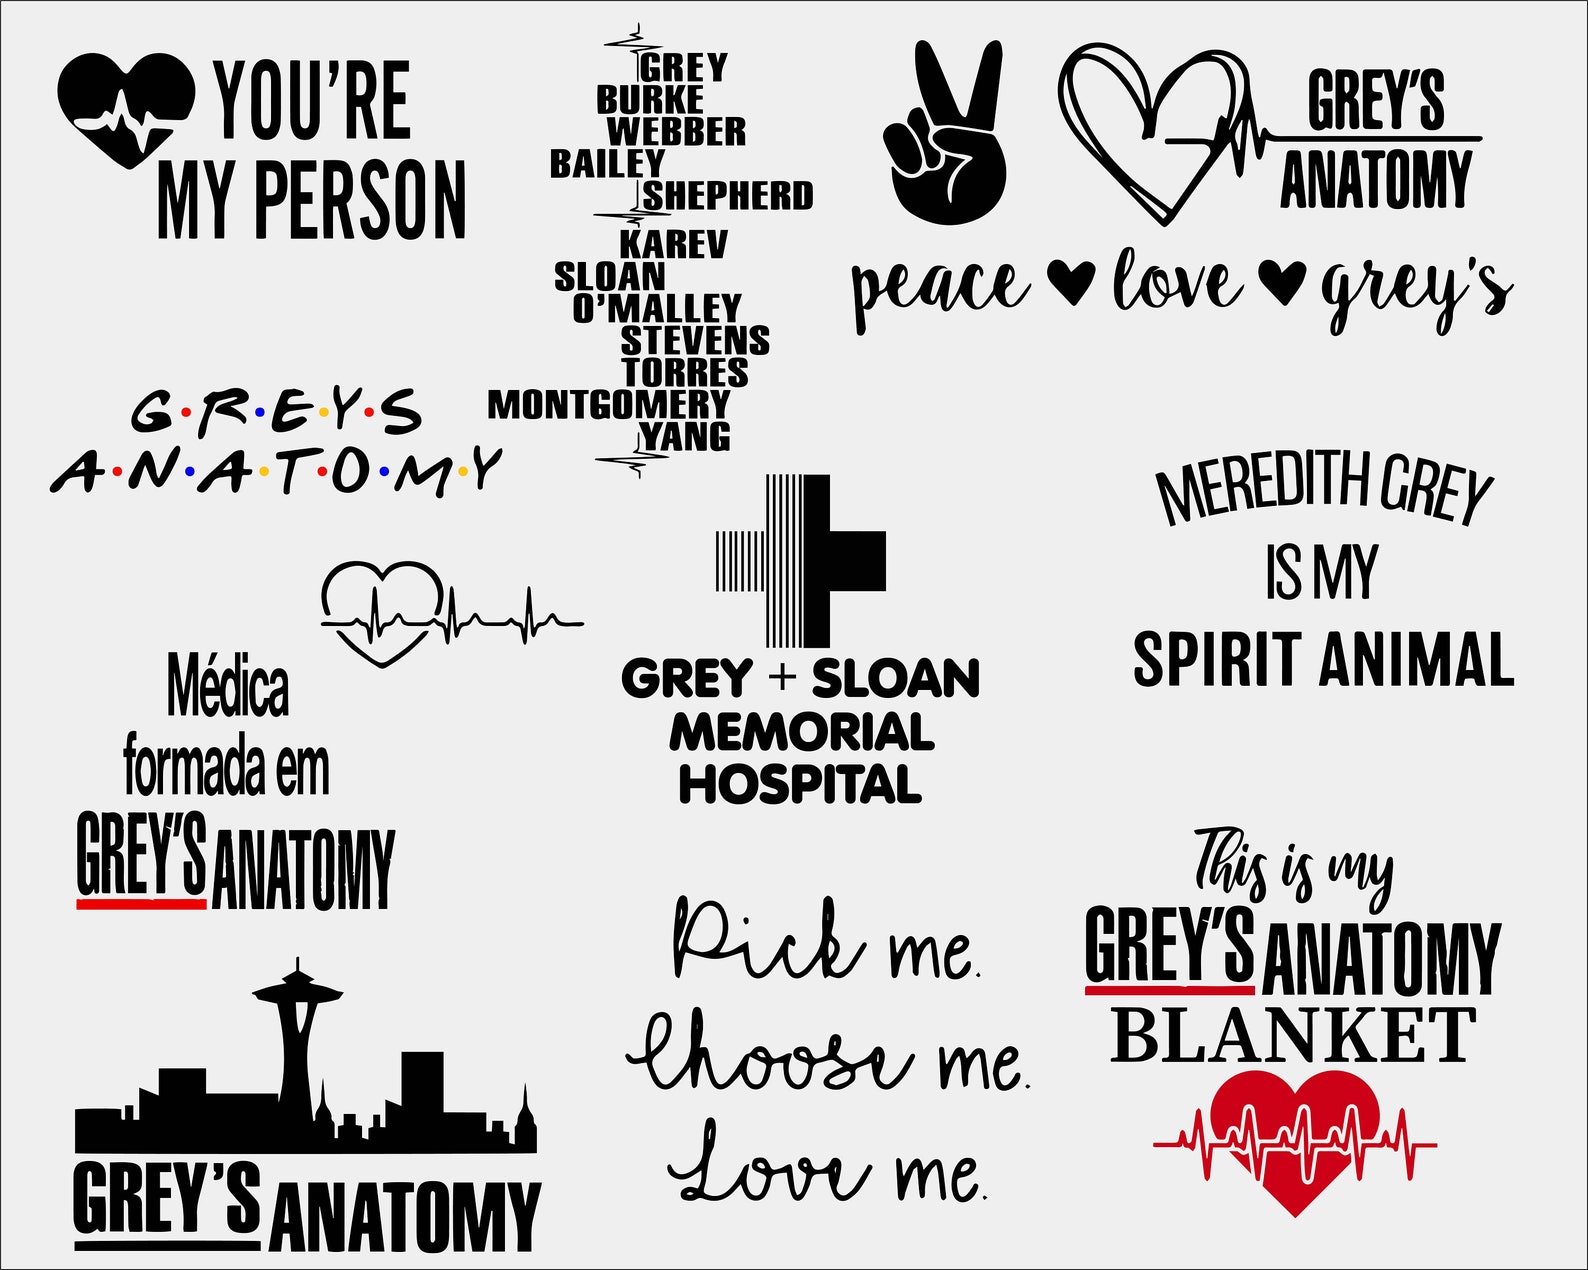 Elements for Grey's anatomy collection.